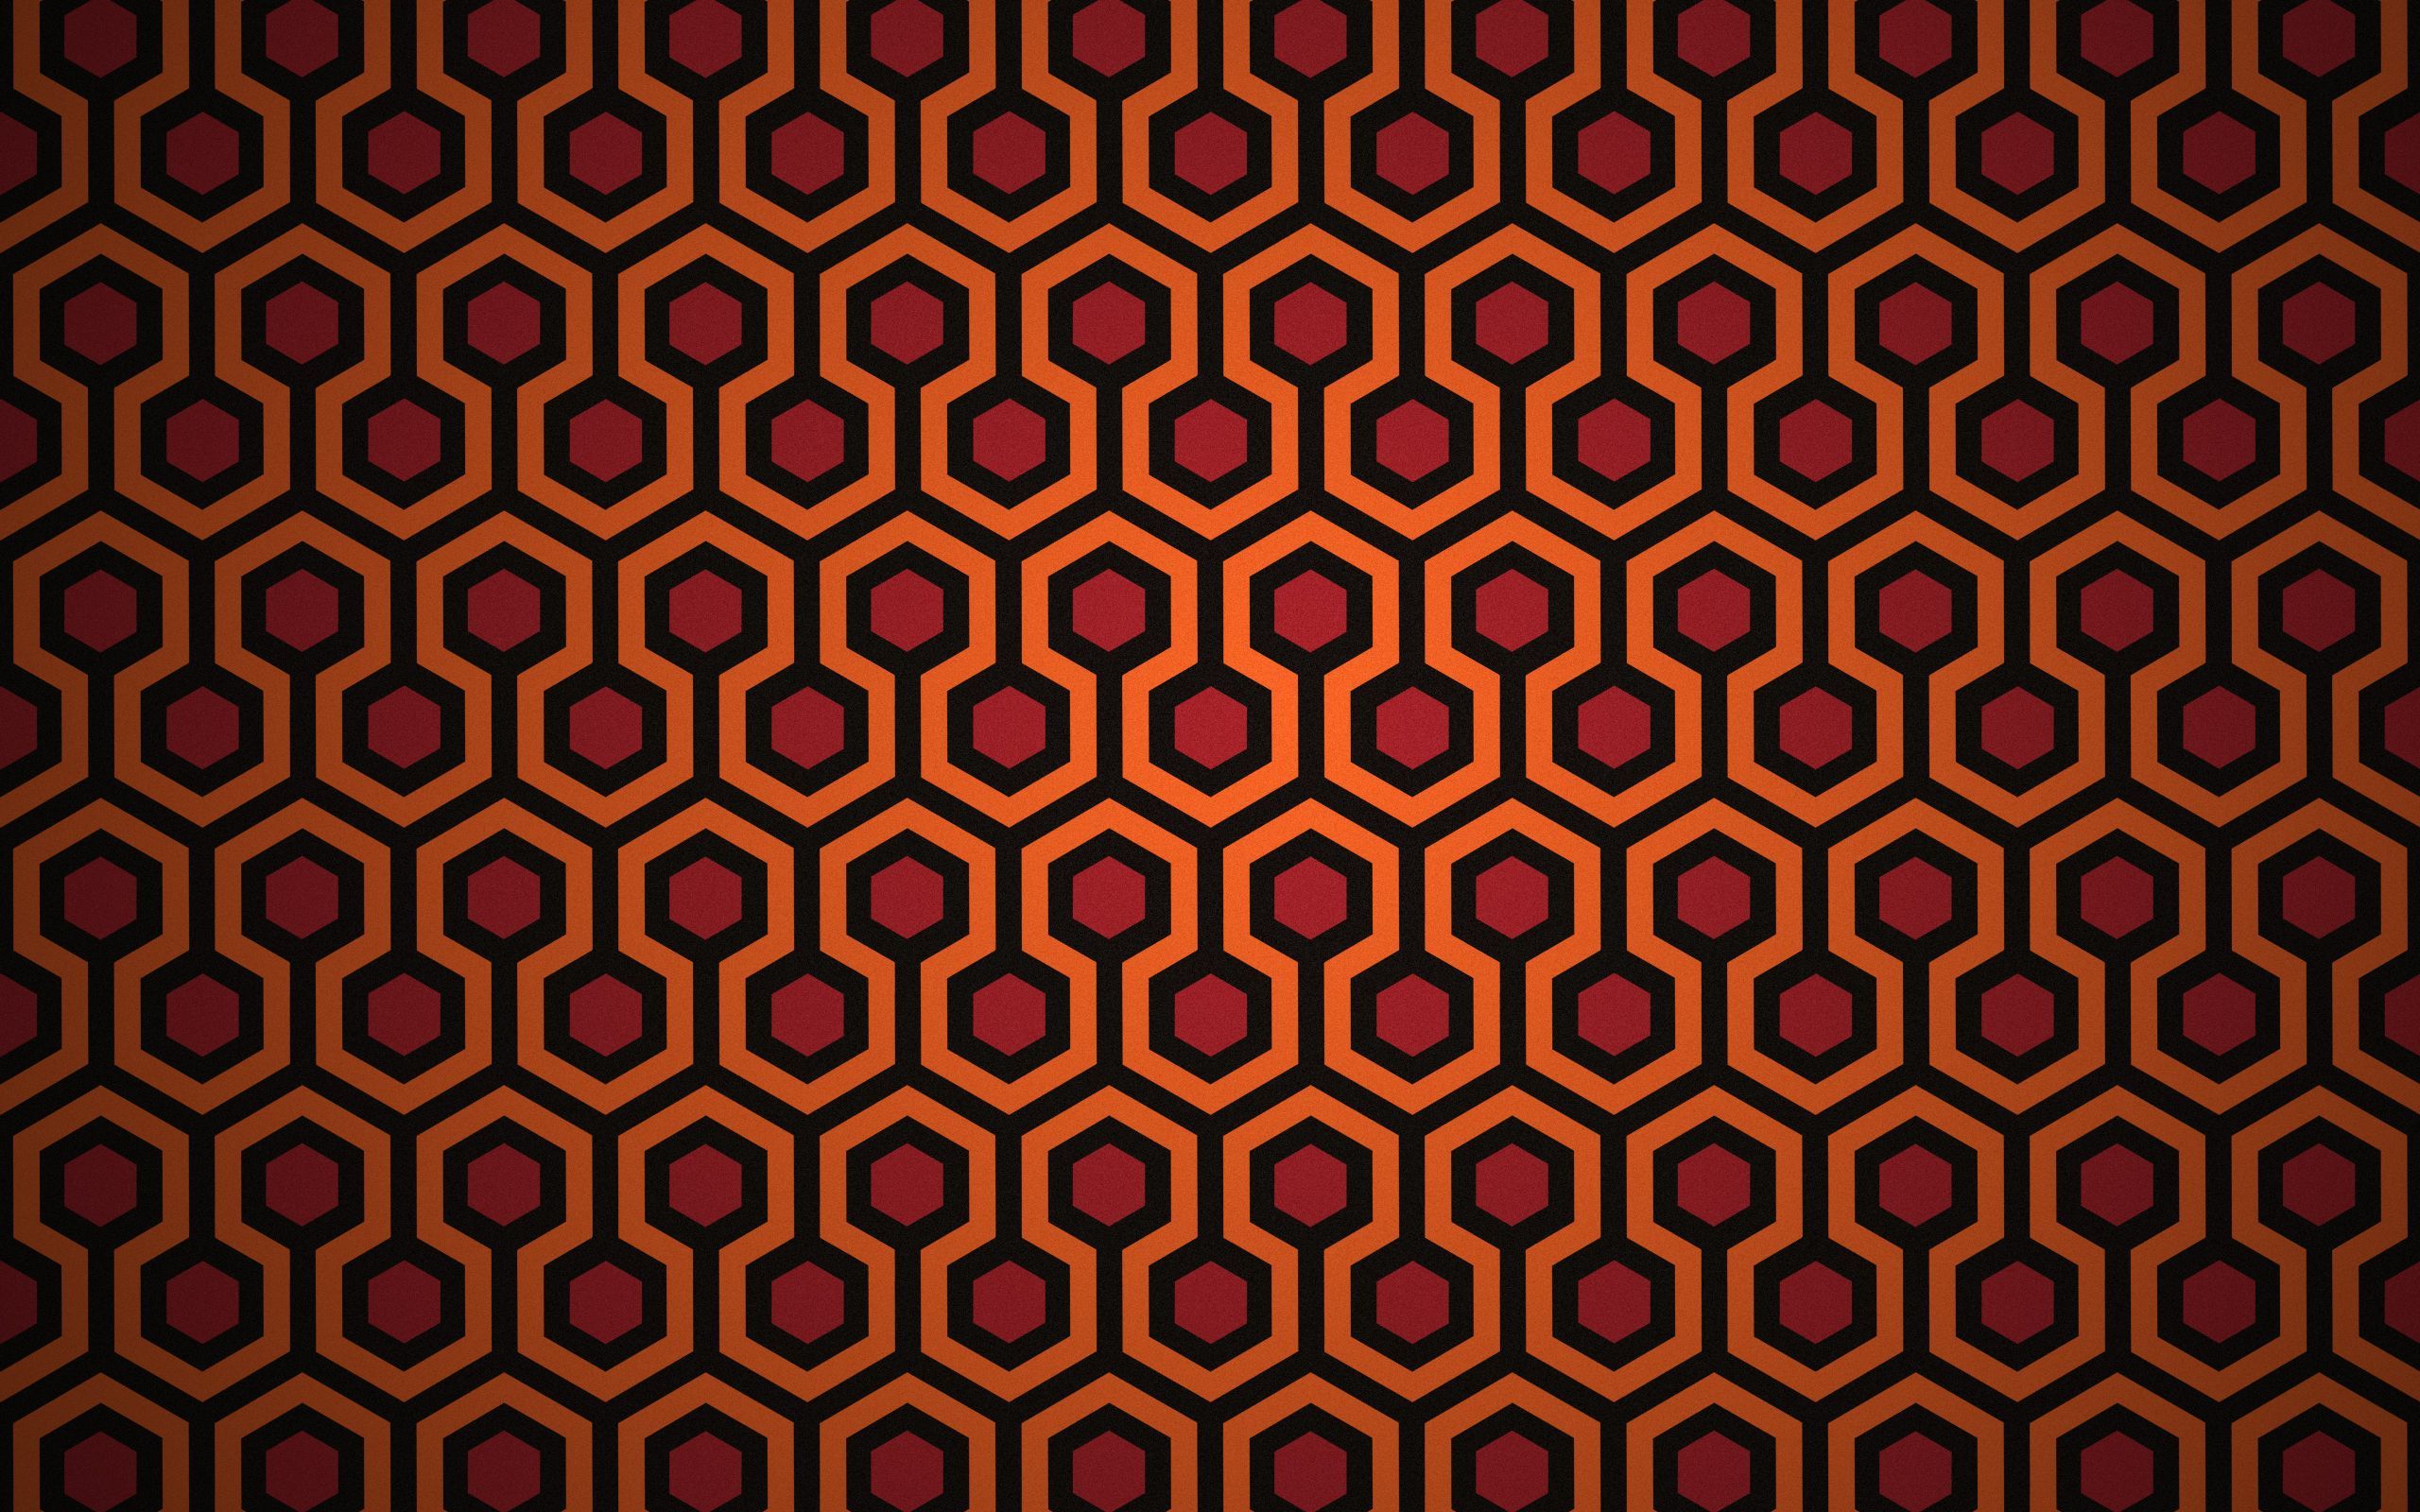 Wallpaper based on the carpet from the Shining not created by me